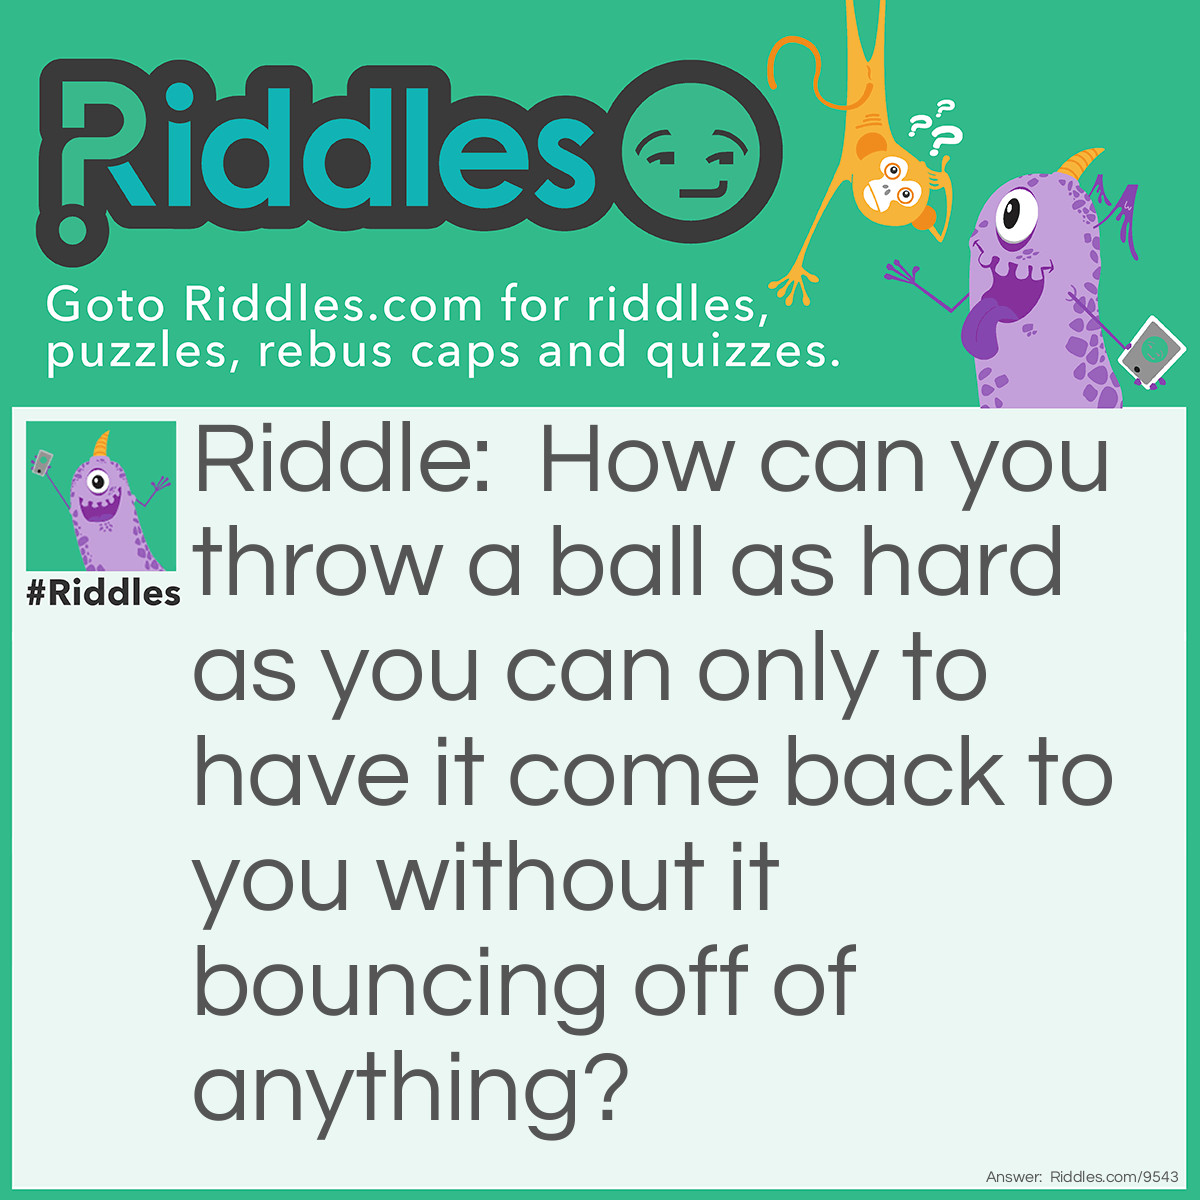 Riddle: How can you throw a ball as hard as you can only to have it come back to you without it bouncing off of anything? Answer: Throw the ball straight into the air.